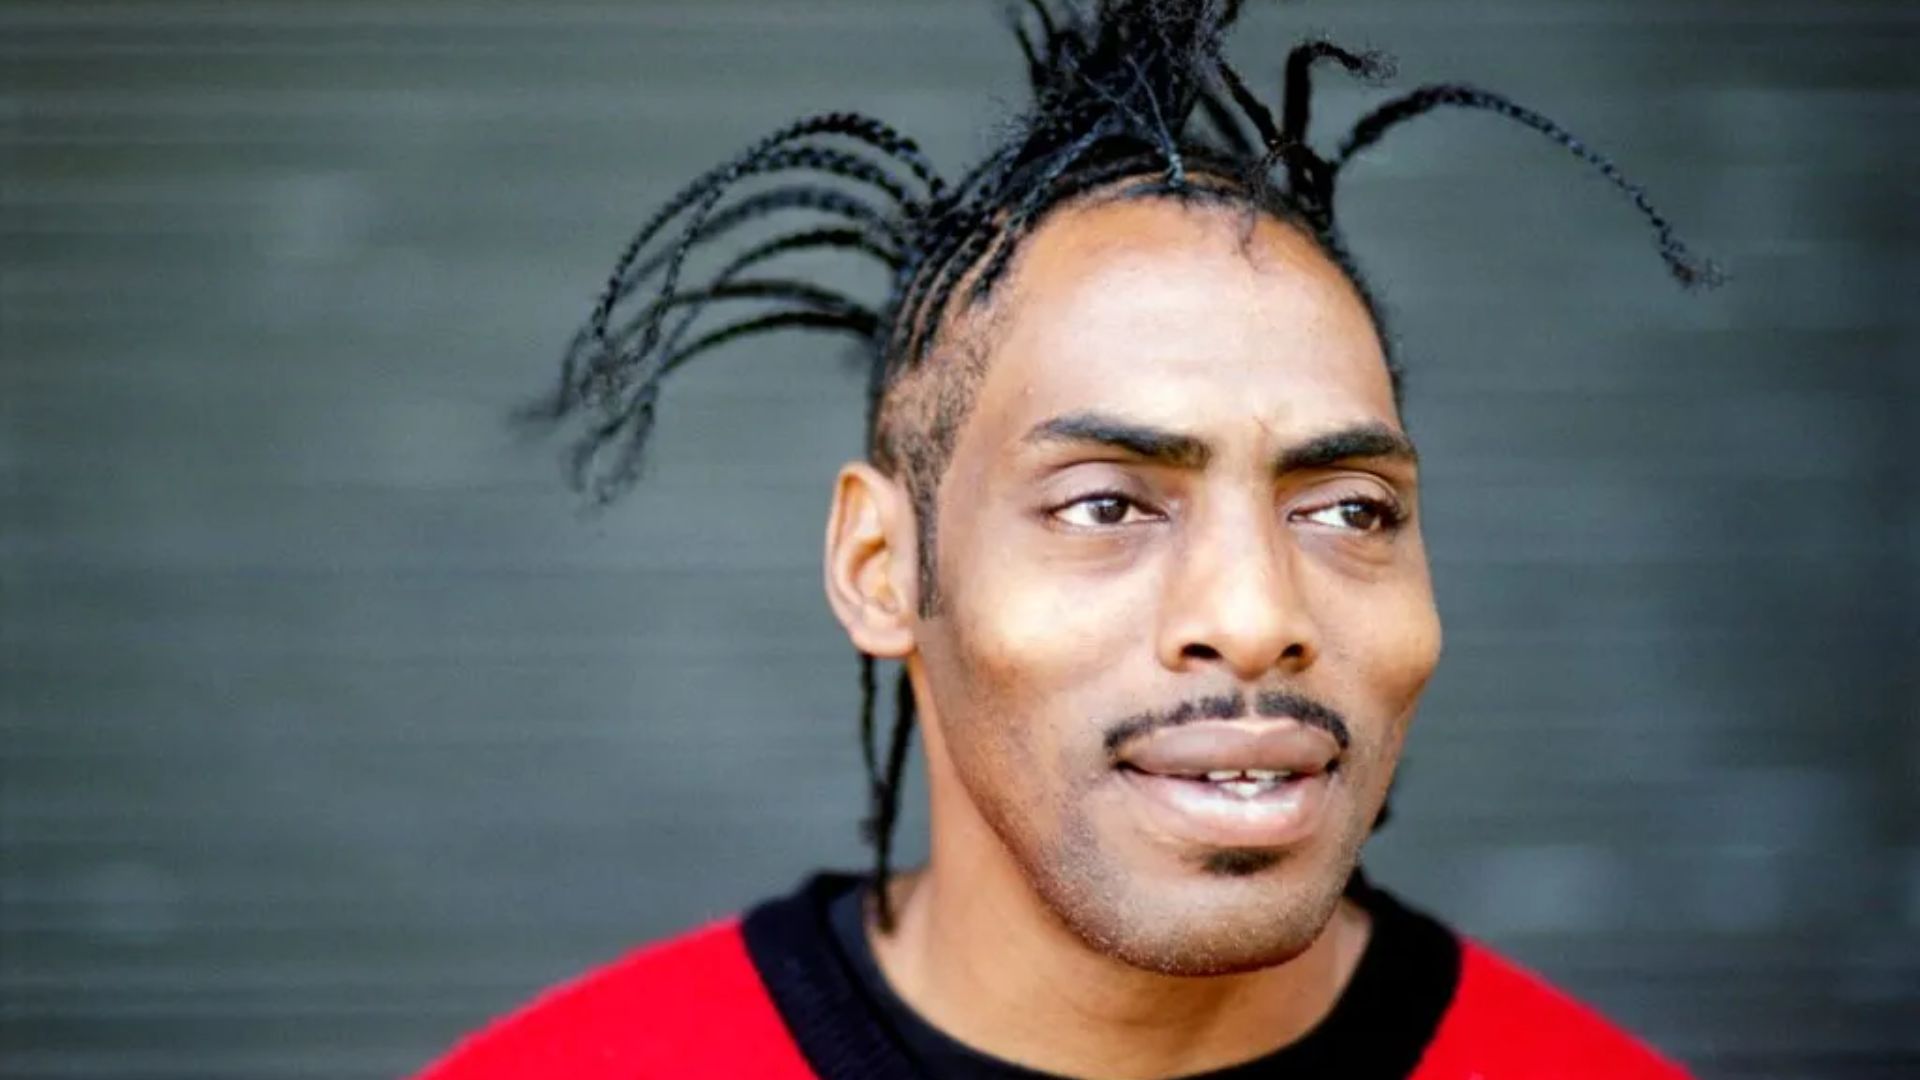 Coolio With His Unique Hairstyle